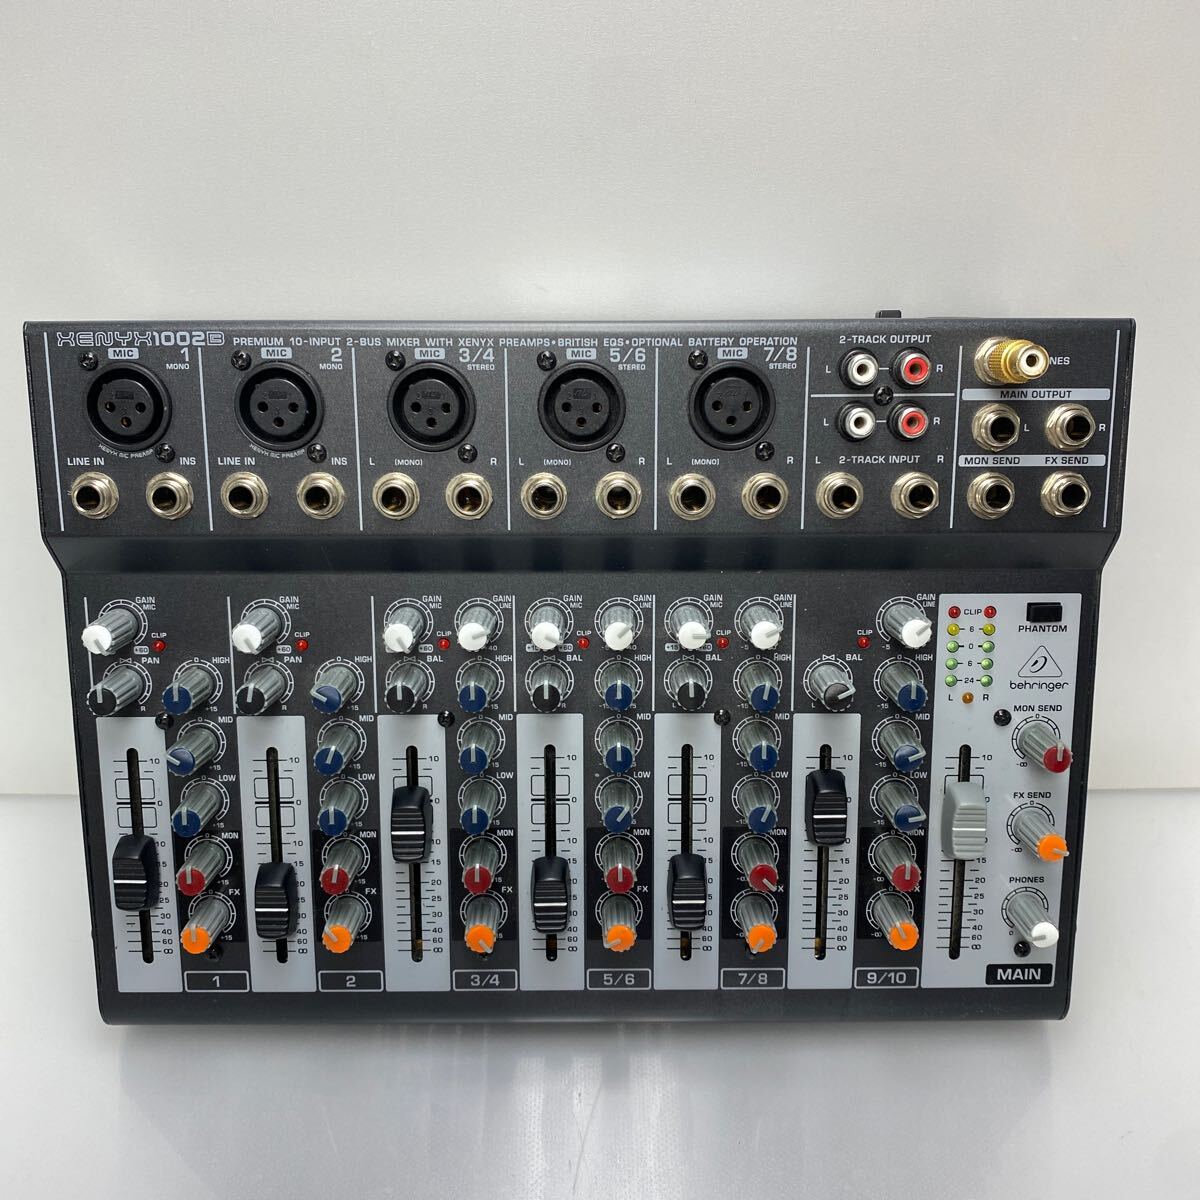 H2-2-050804 BEHRINGER XENYX 1002B Behringer 10ch analog mixer AC adaptor attaching operation goods present condition goods 